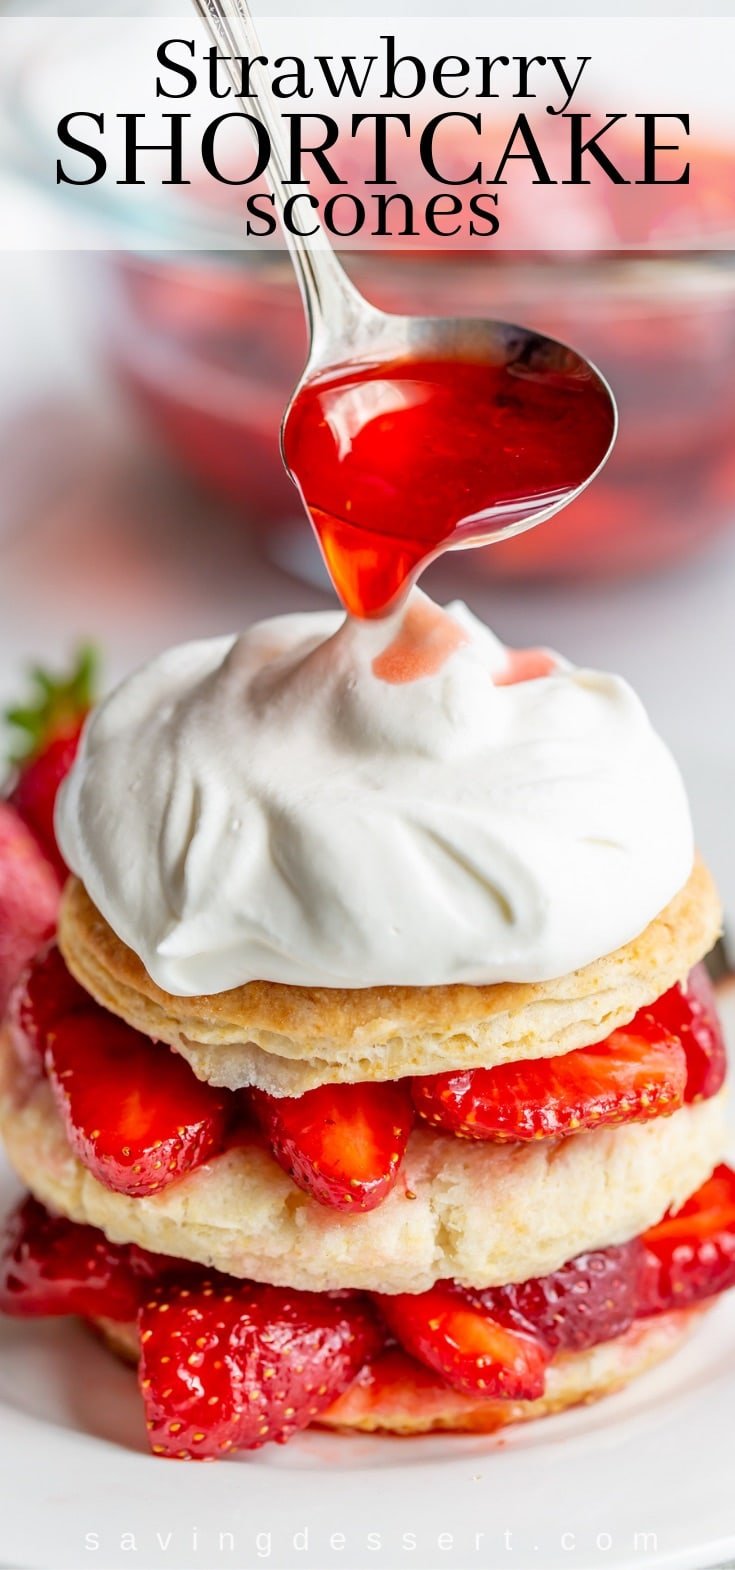 Strawberry shortcake scones drizzled with strawberry syrup